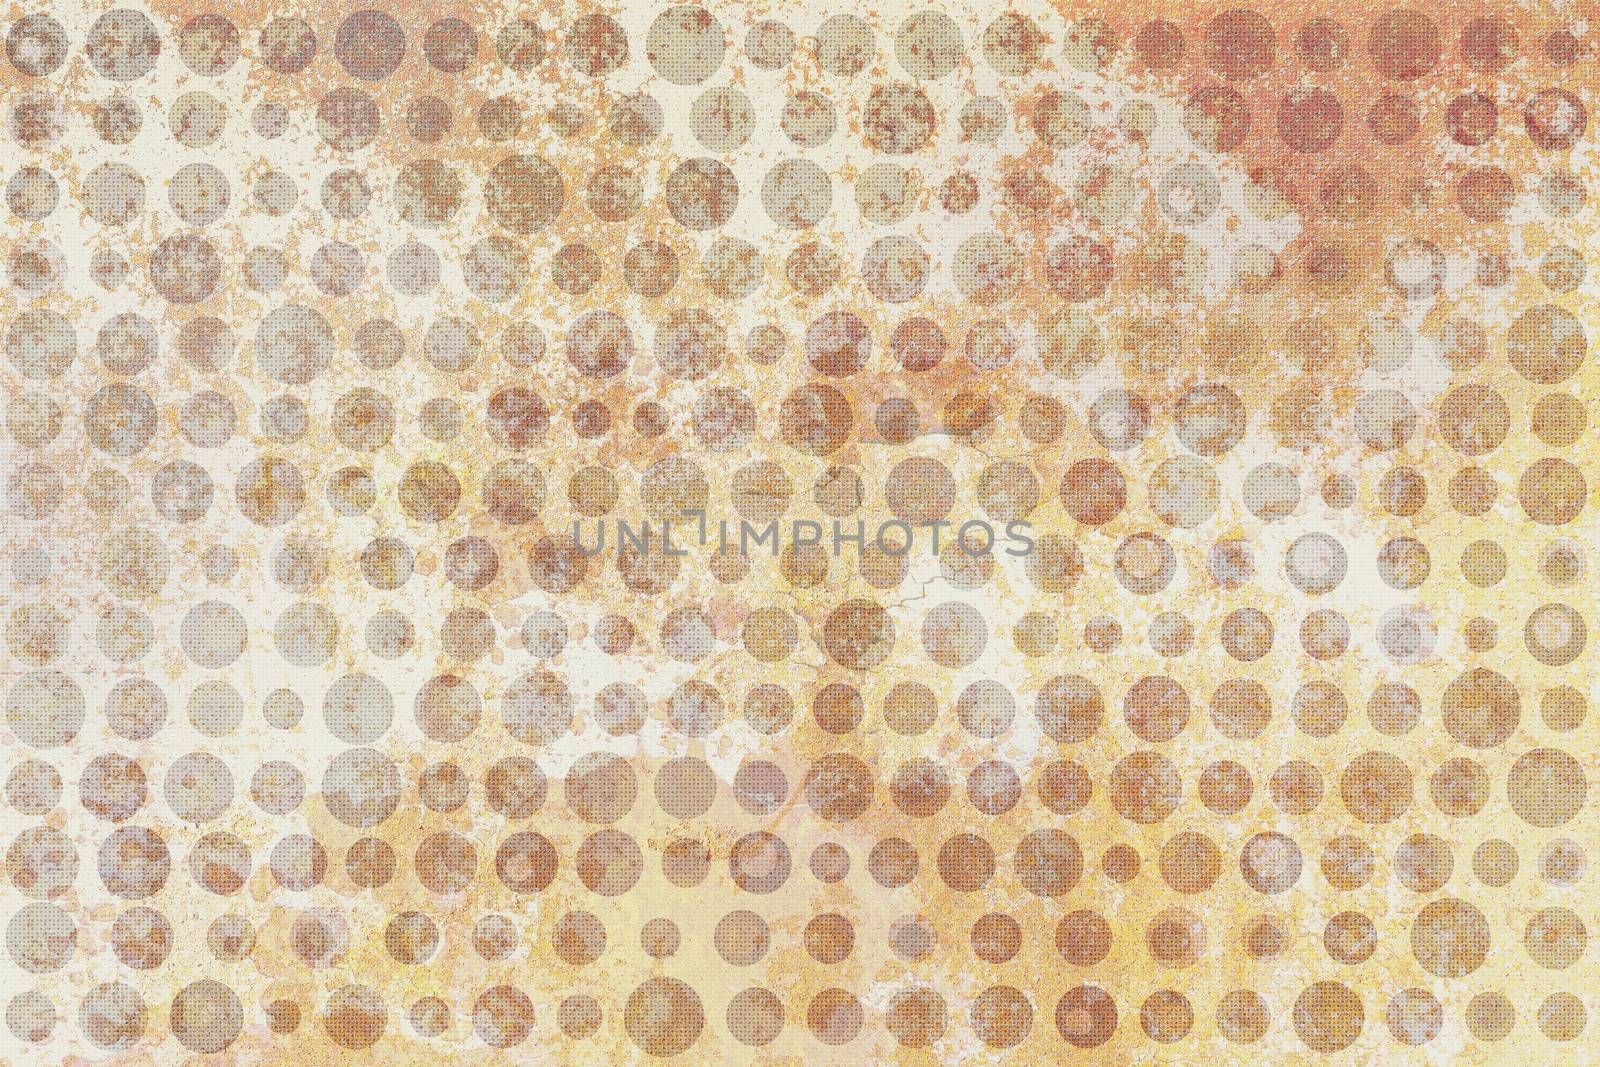 Texture background made of  brown dots, or circles, on yellow and beige